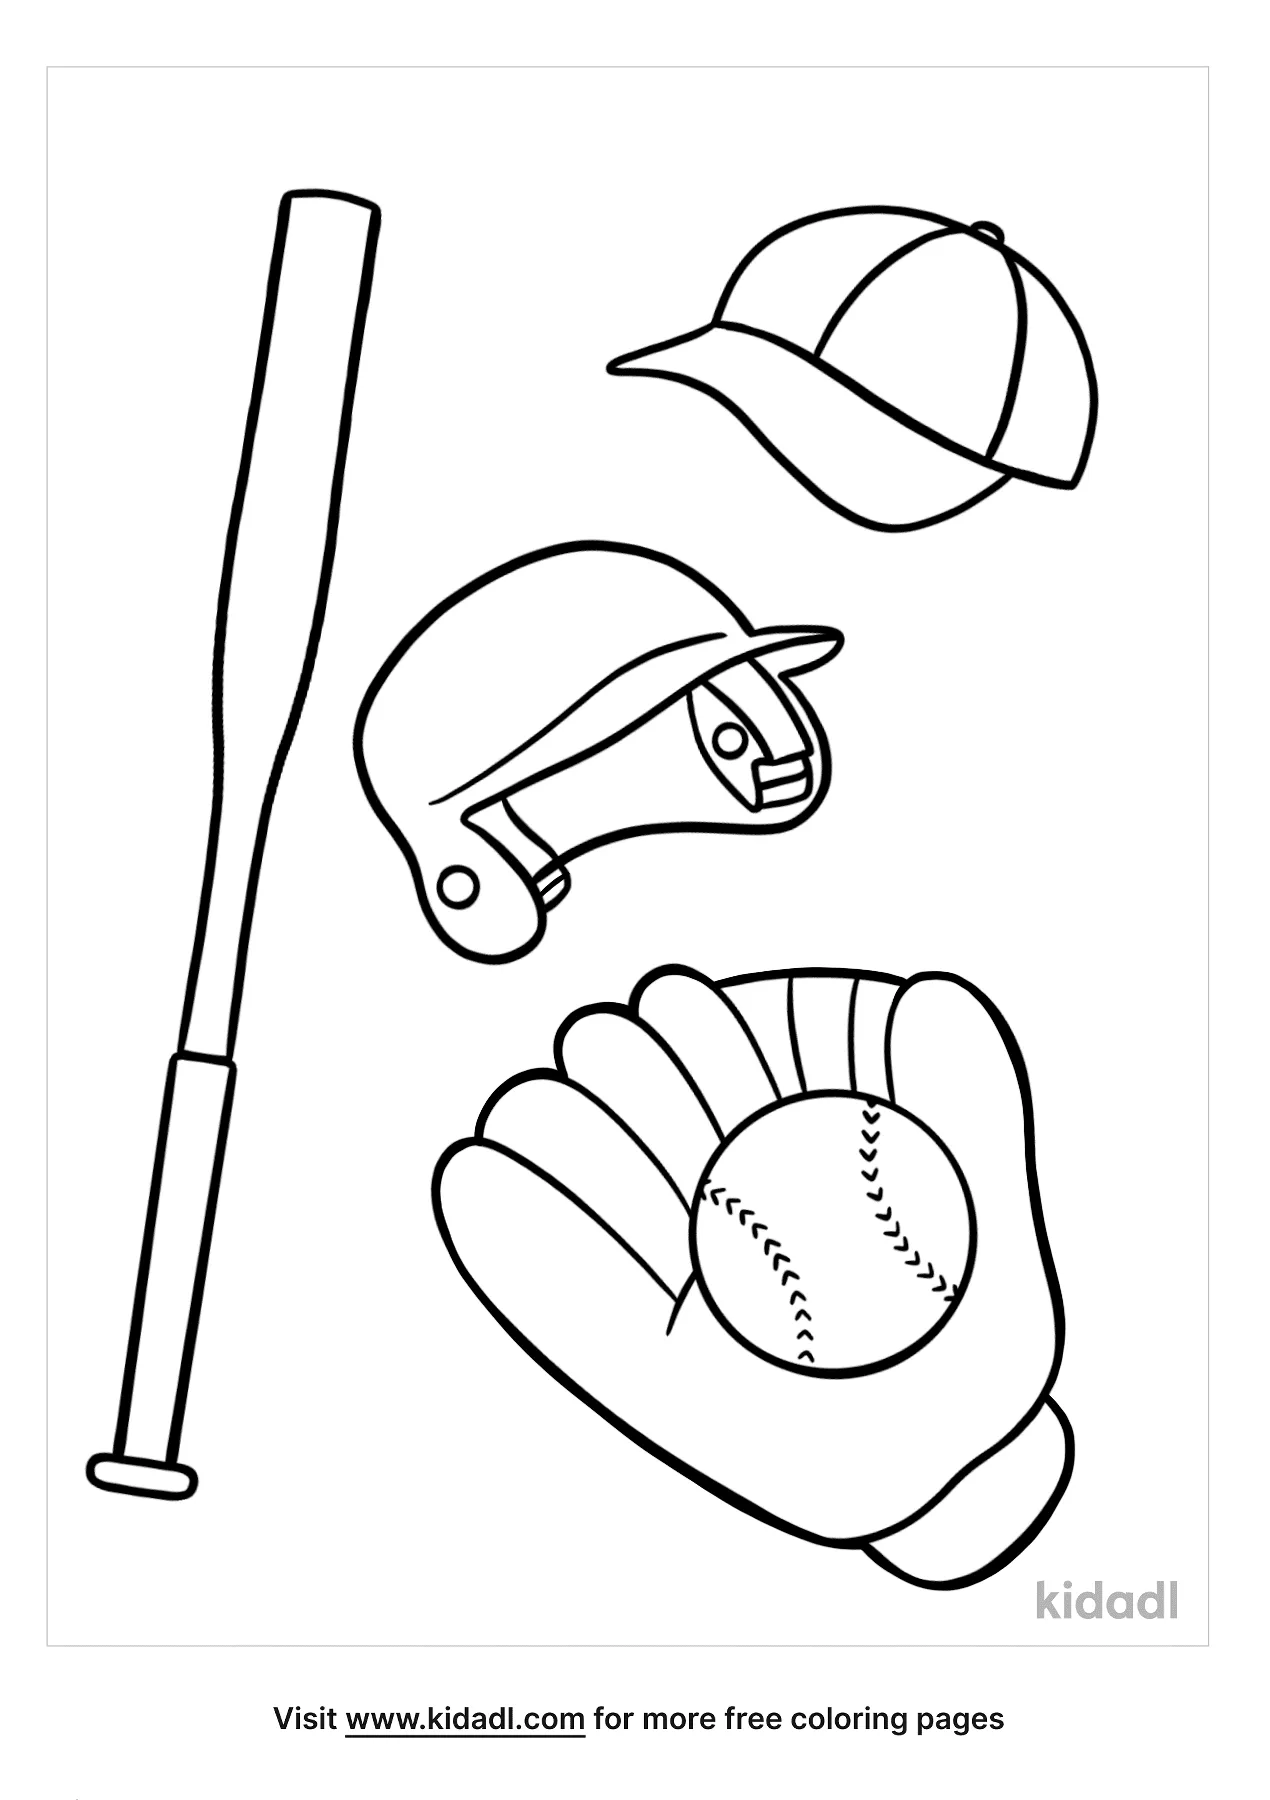 Softball Coloring Pages Free Sports Coloring Pages Kidadl